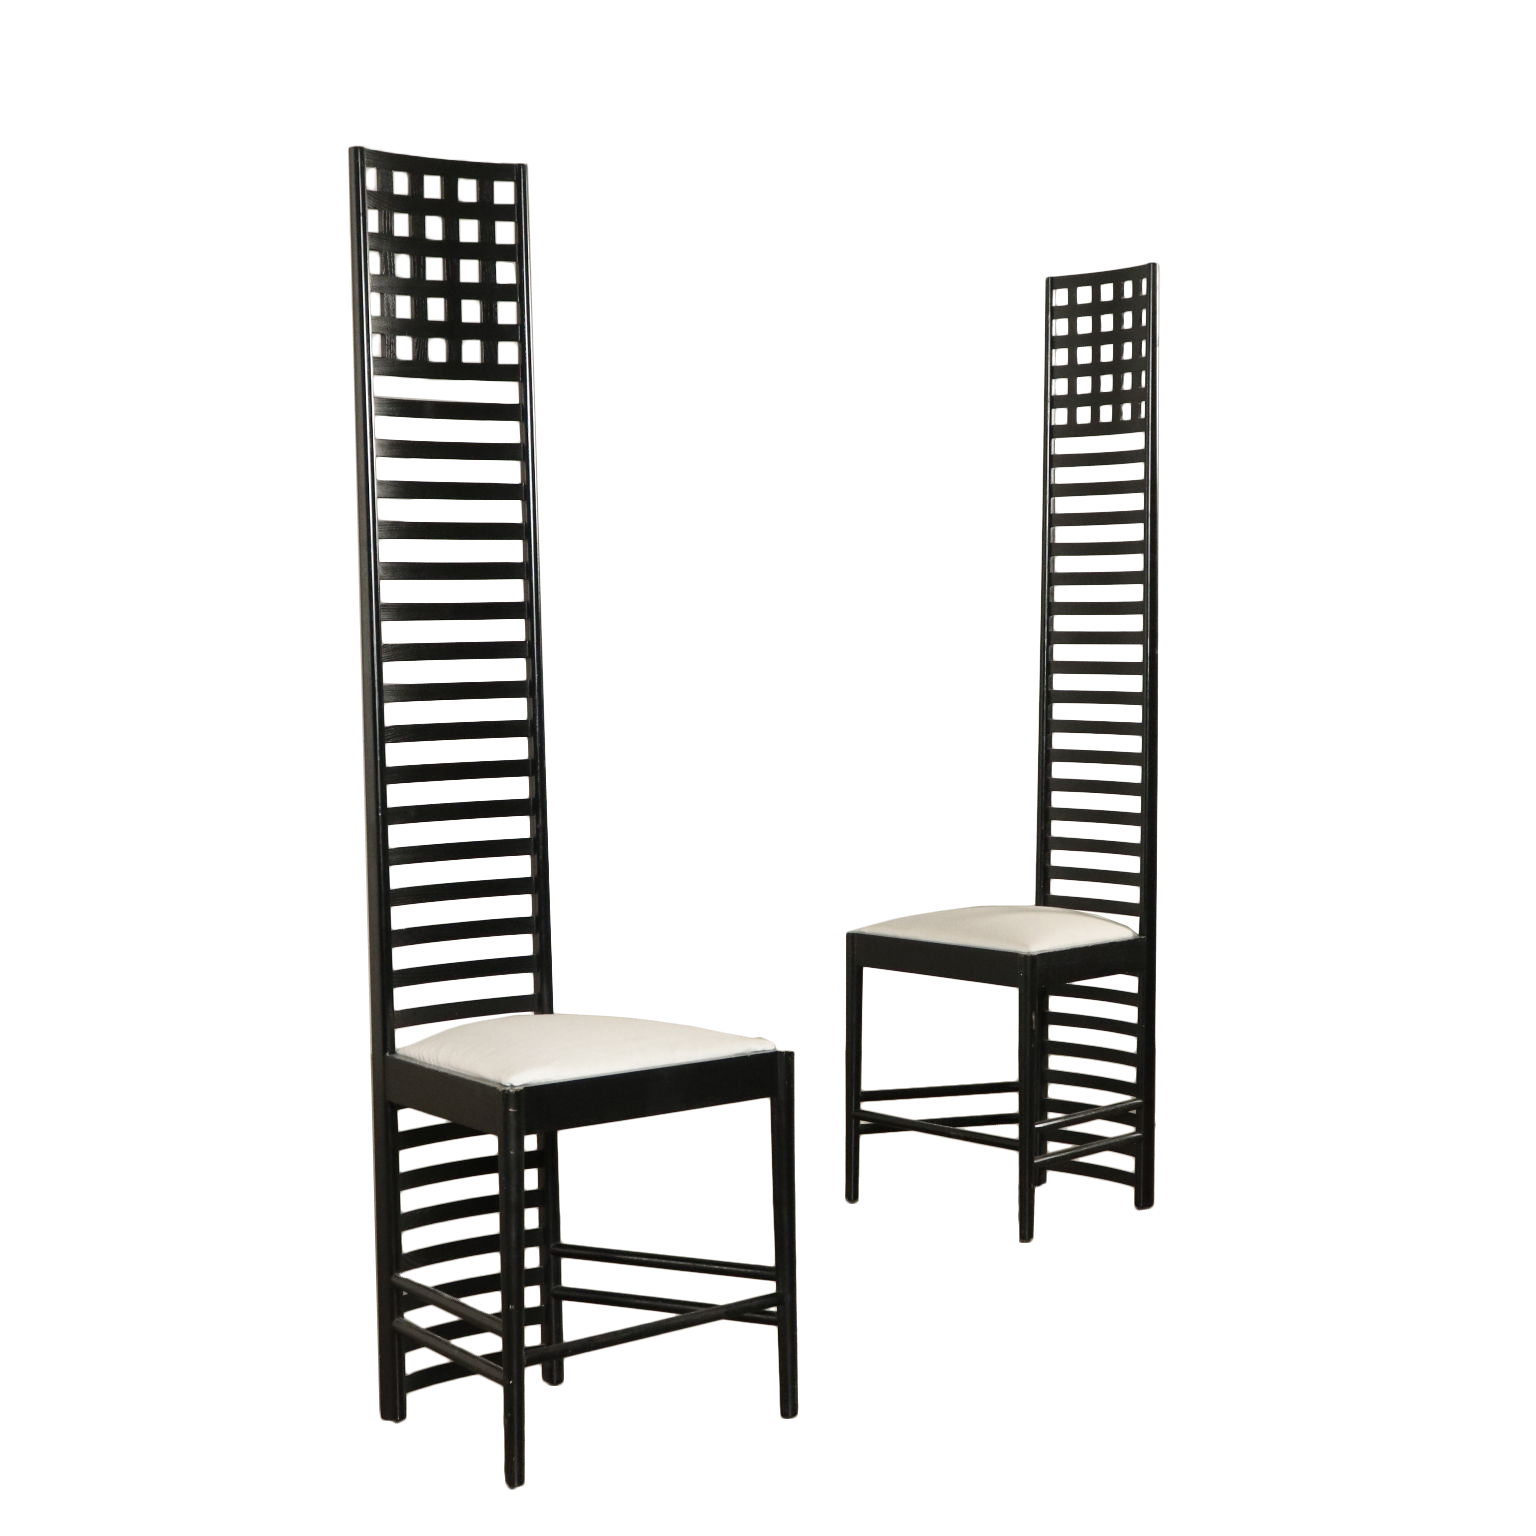 Hill House Chairs Designed by Charles Rennie Mackintosh 1980's, Hill ...